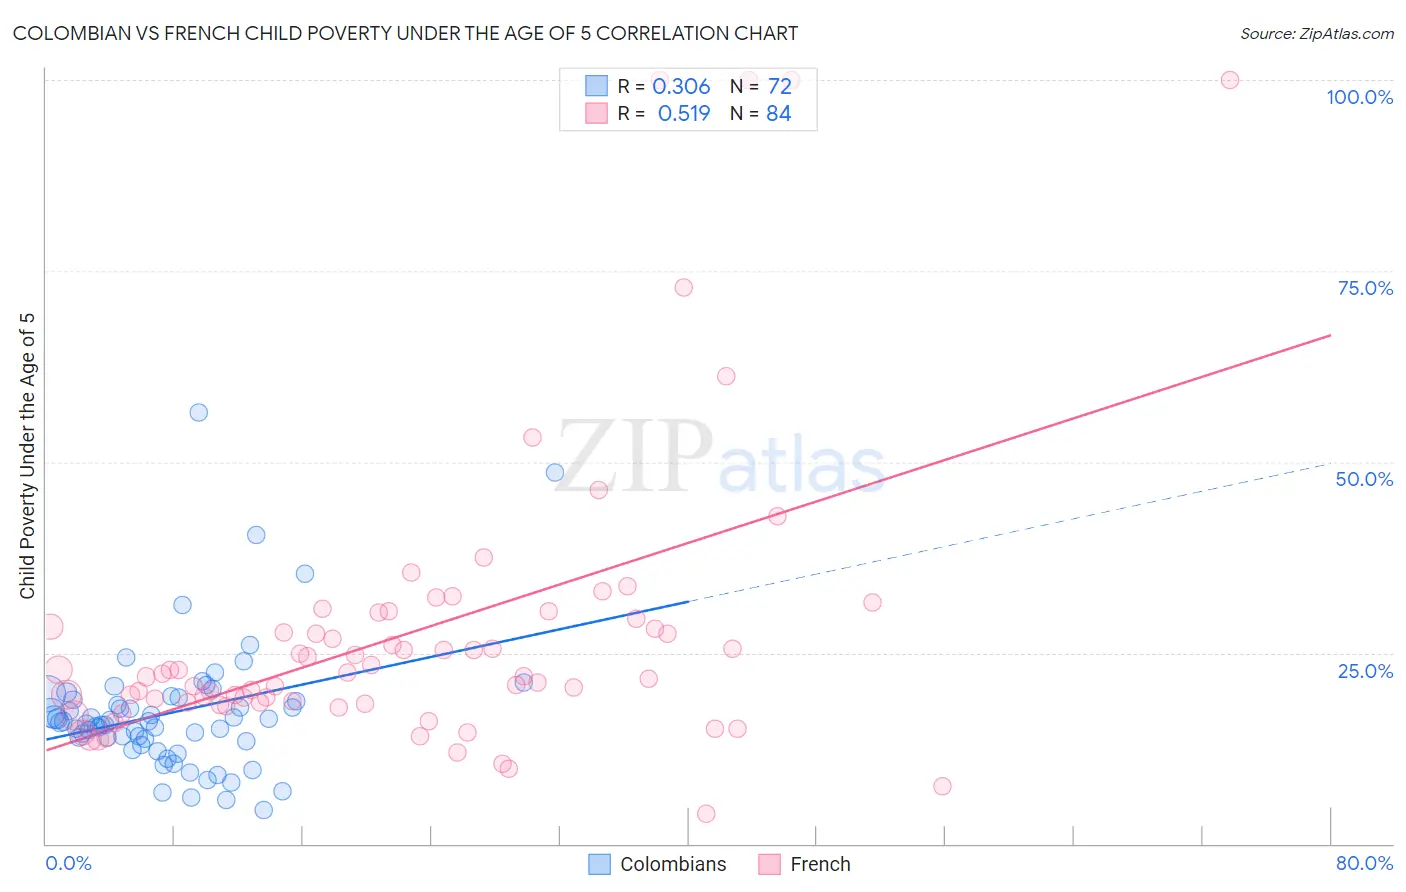 Colombian vs French Child Poverty Under the Age of 5